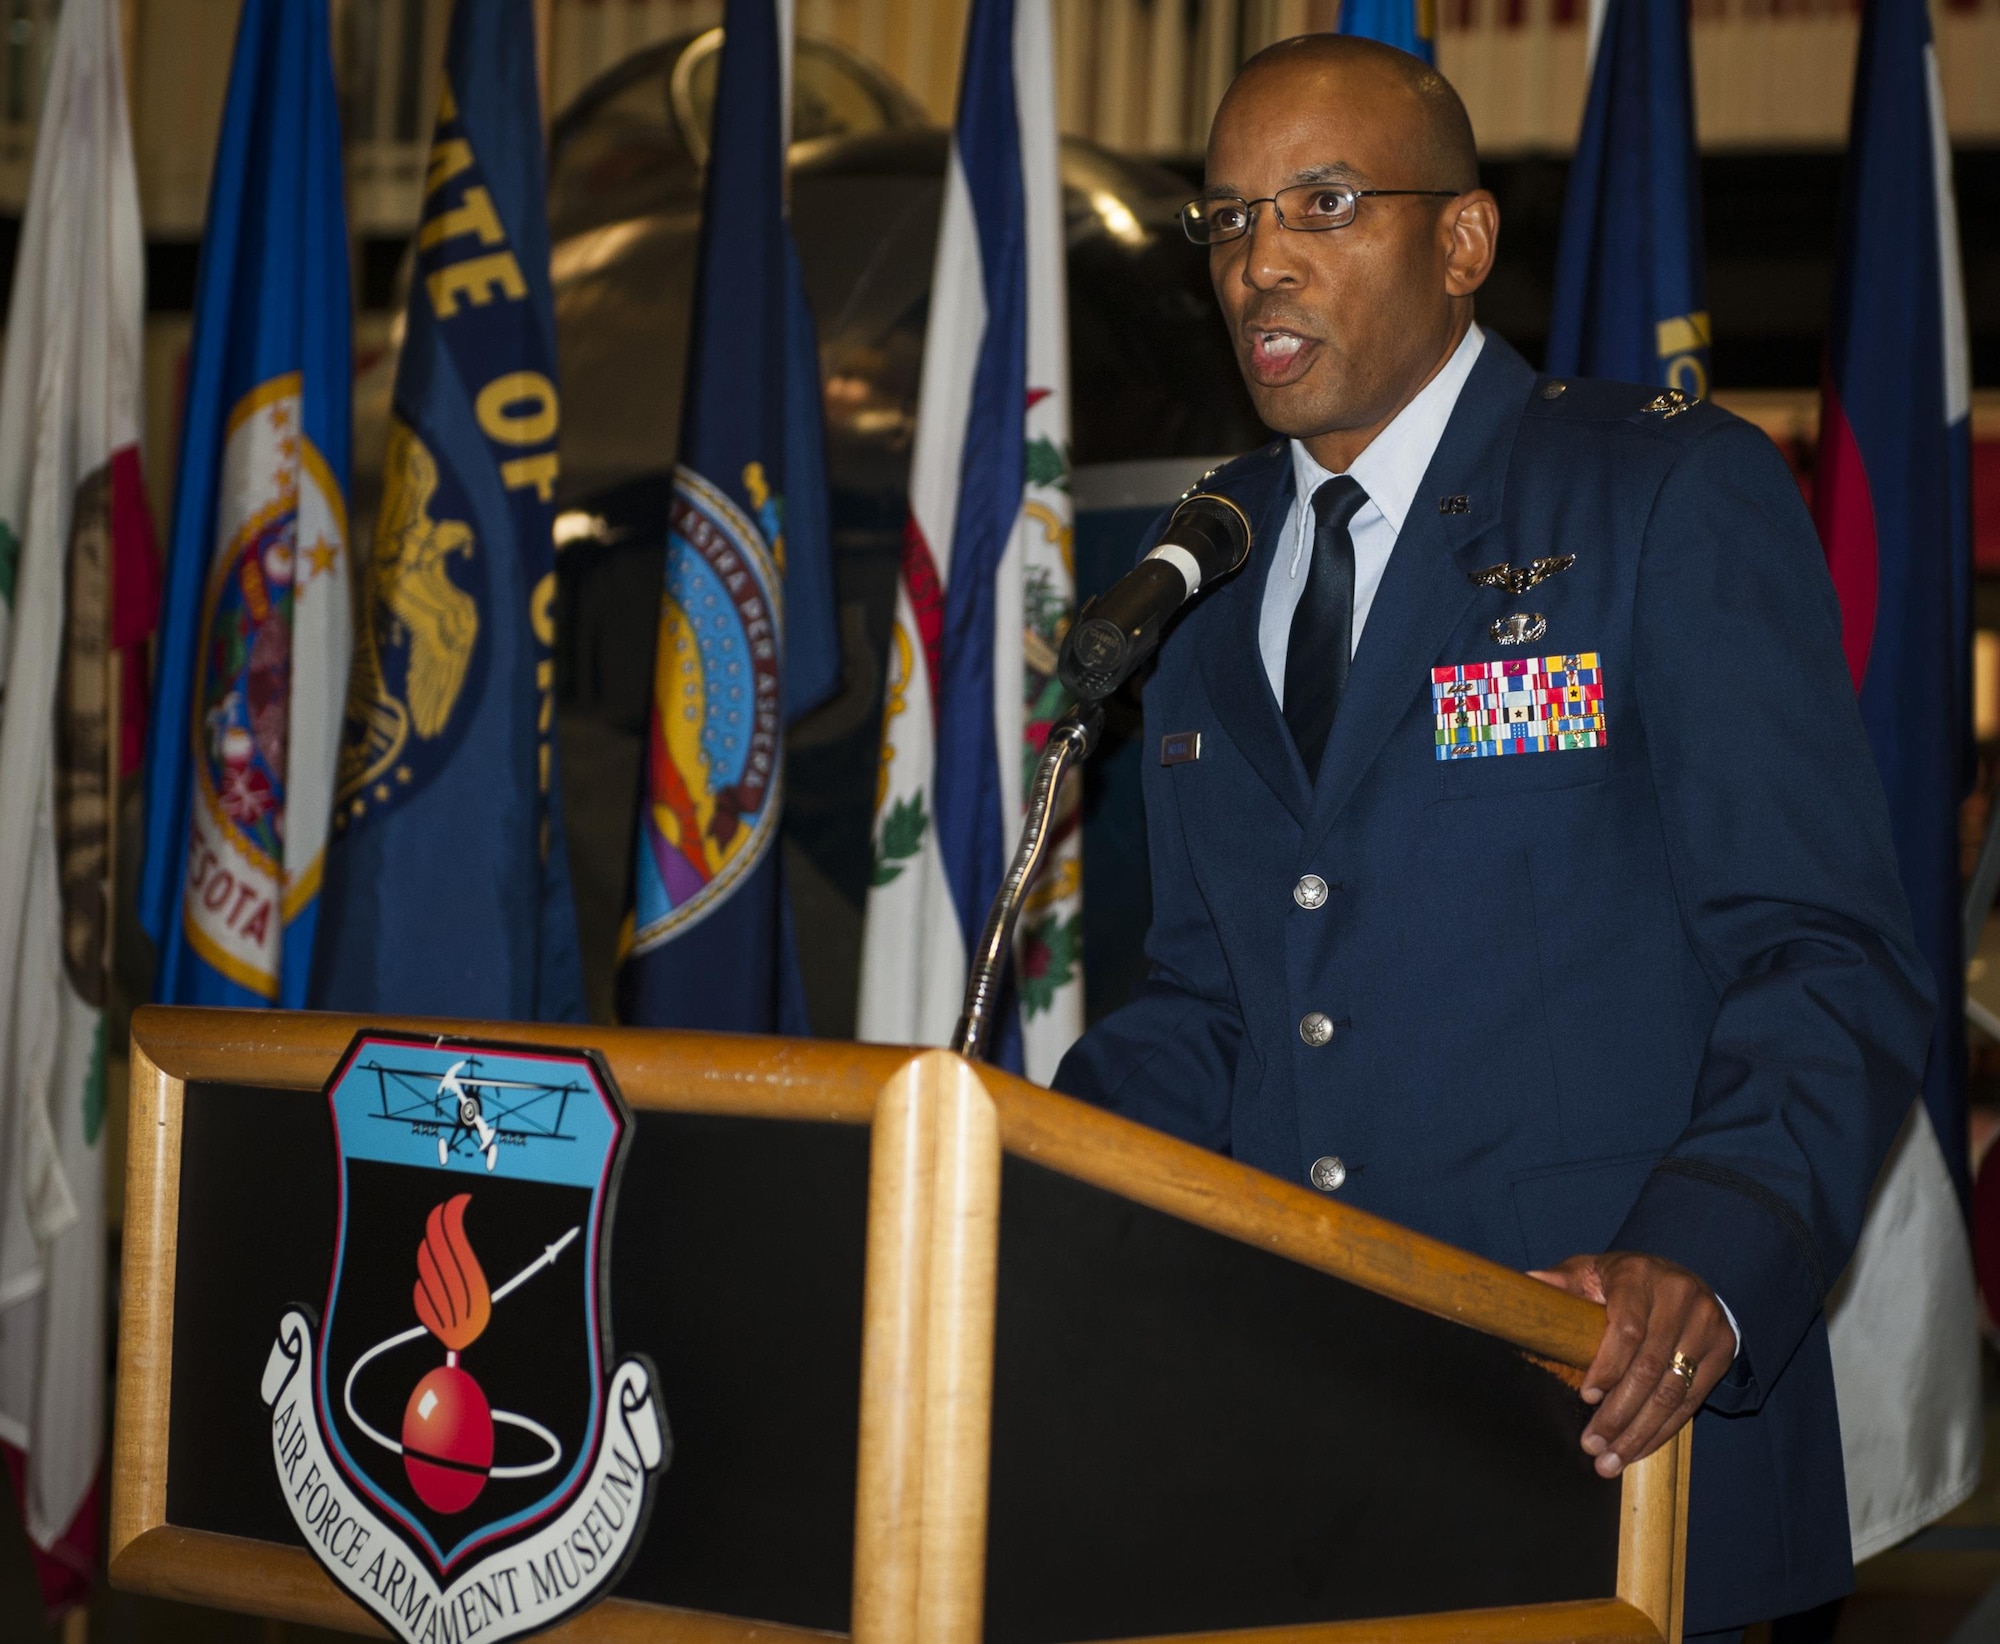 Col. Terrence Mitchell, 96th Medical Group’s medical chief of staff, is the guest speaker at the Black History Month celebration at the Air Force Armament Museum Feb. 15 at Eglin Air Force Base, Fla.  The physician encouraged the audience to become part of the solution to this year’s theme, “The Crisis in Black Education.”  (U.S. Air Force photo/Kevin Gaddie)